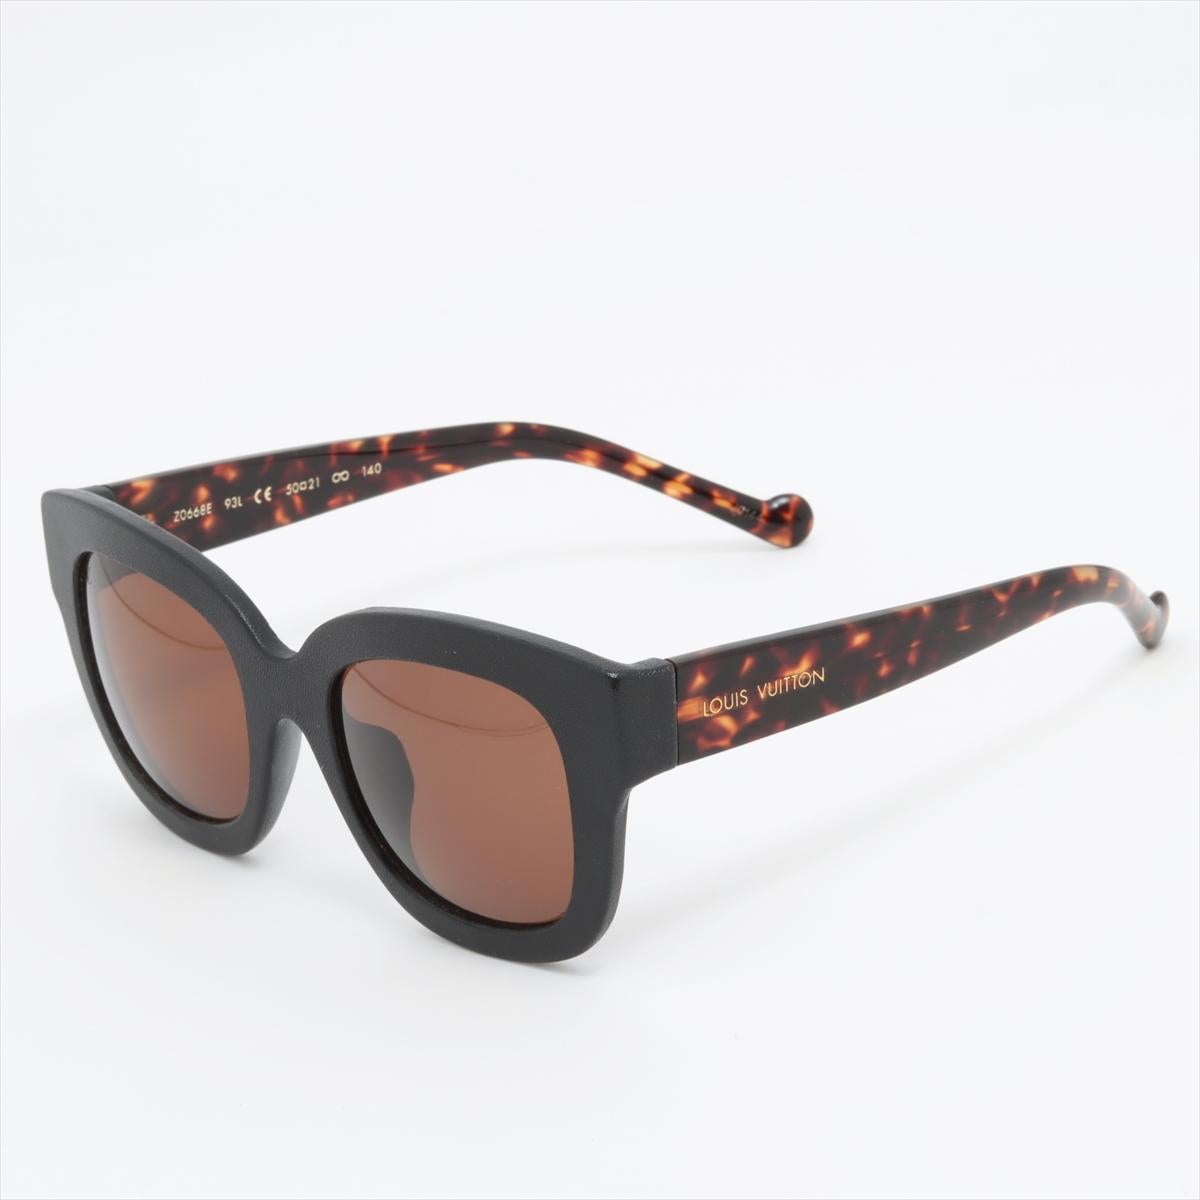 Louis Vuitton Plastic Sunglass Dark Tortoise In Good Condition For Sale In Indianapolis, IN